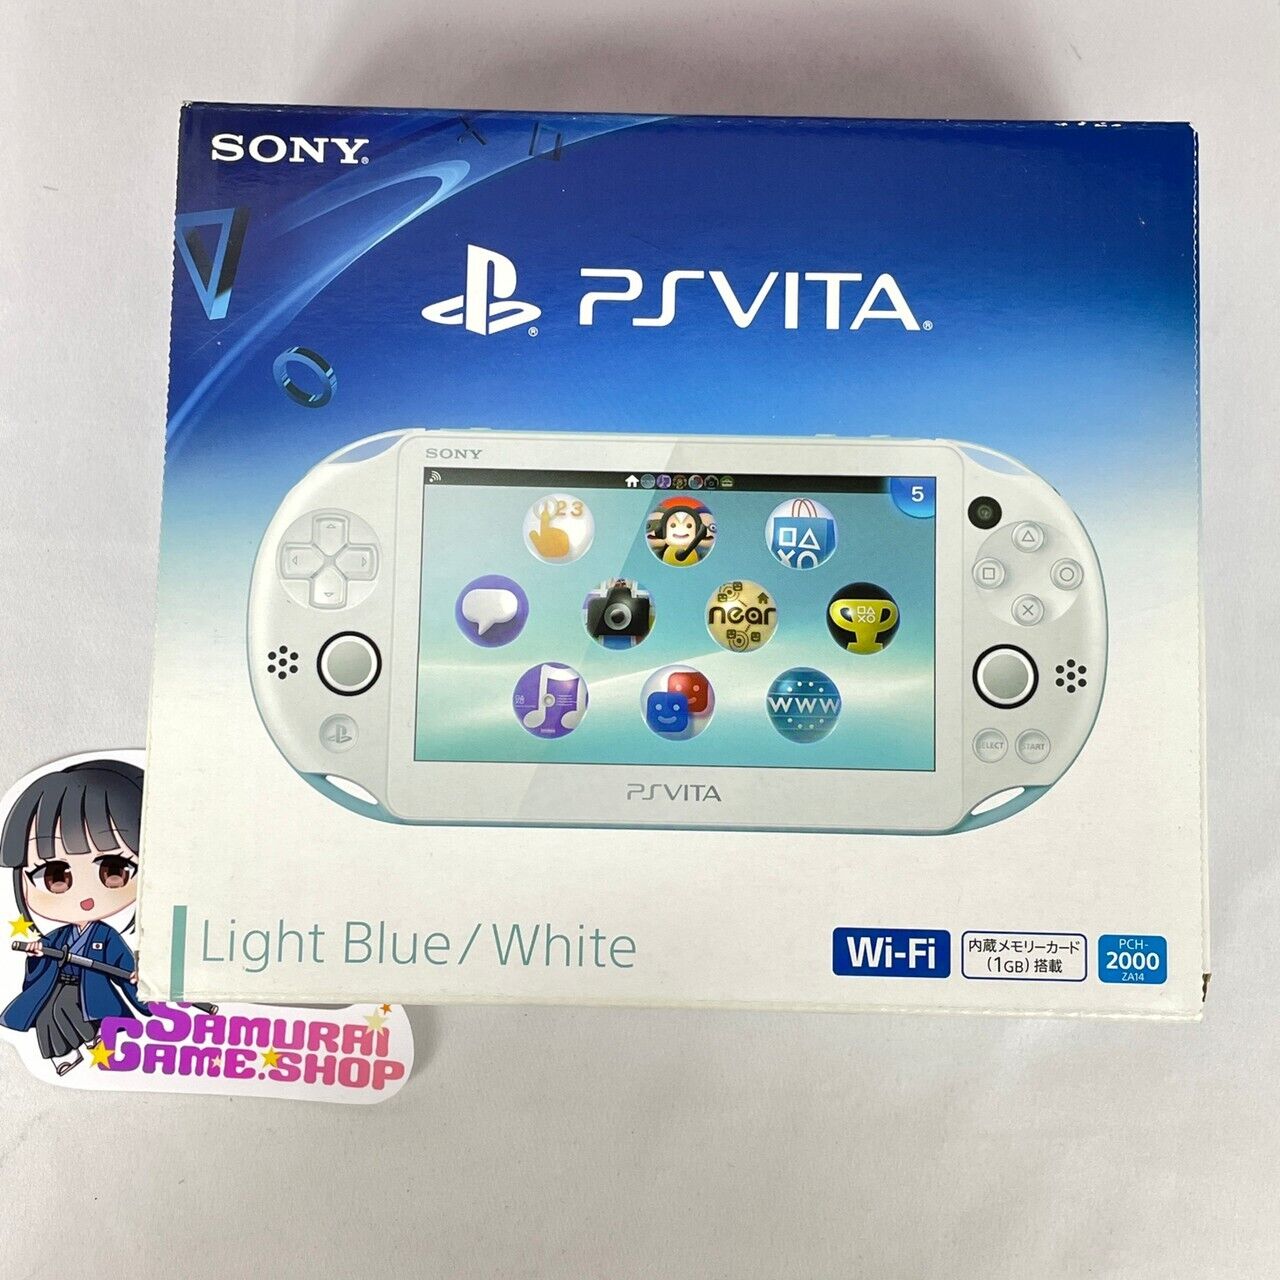 Sony Playstation Vita 1GB Console - Black for sale online